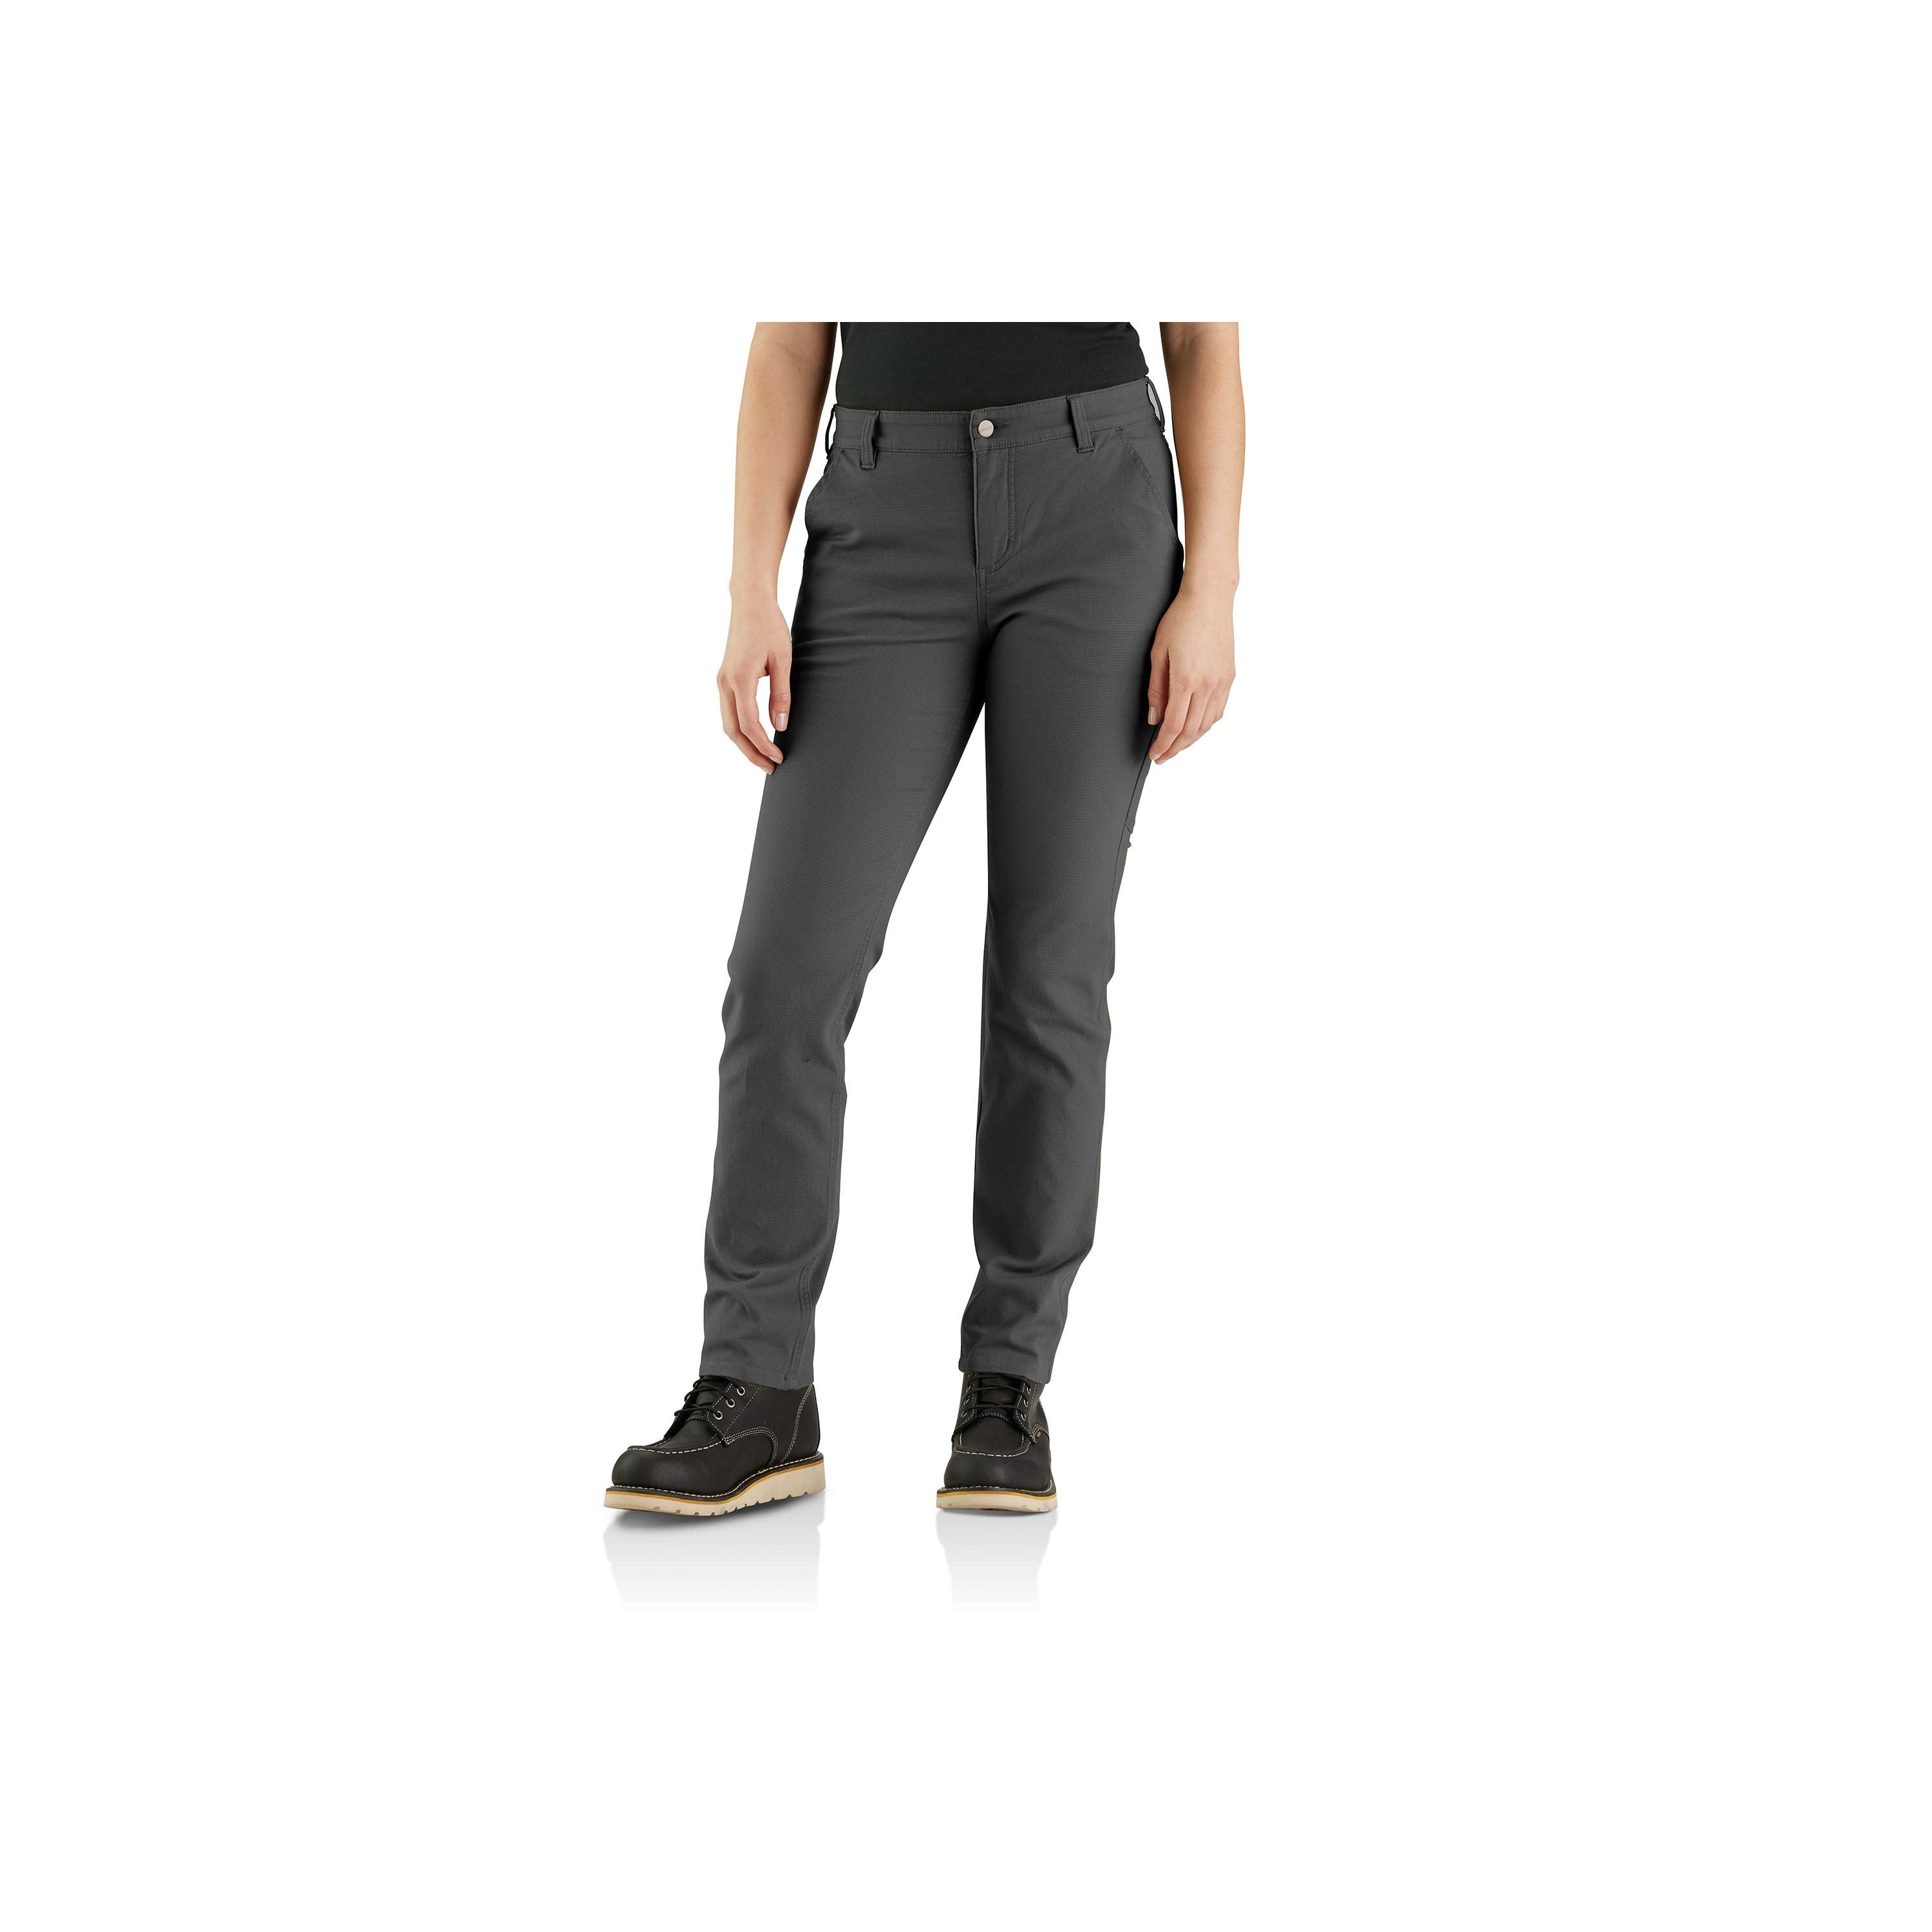 Women's Rugged Flex Relaxed Fit Canvas Work Pants